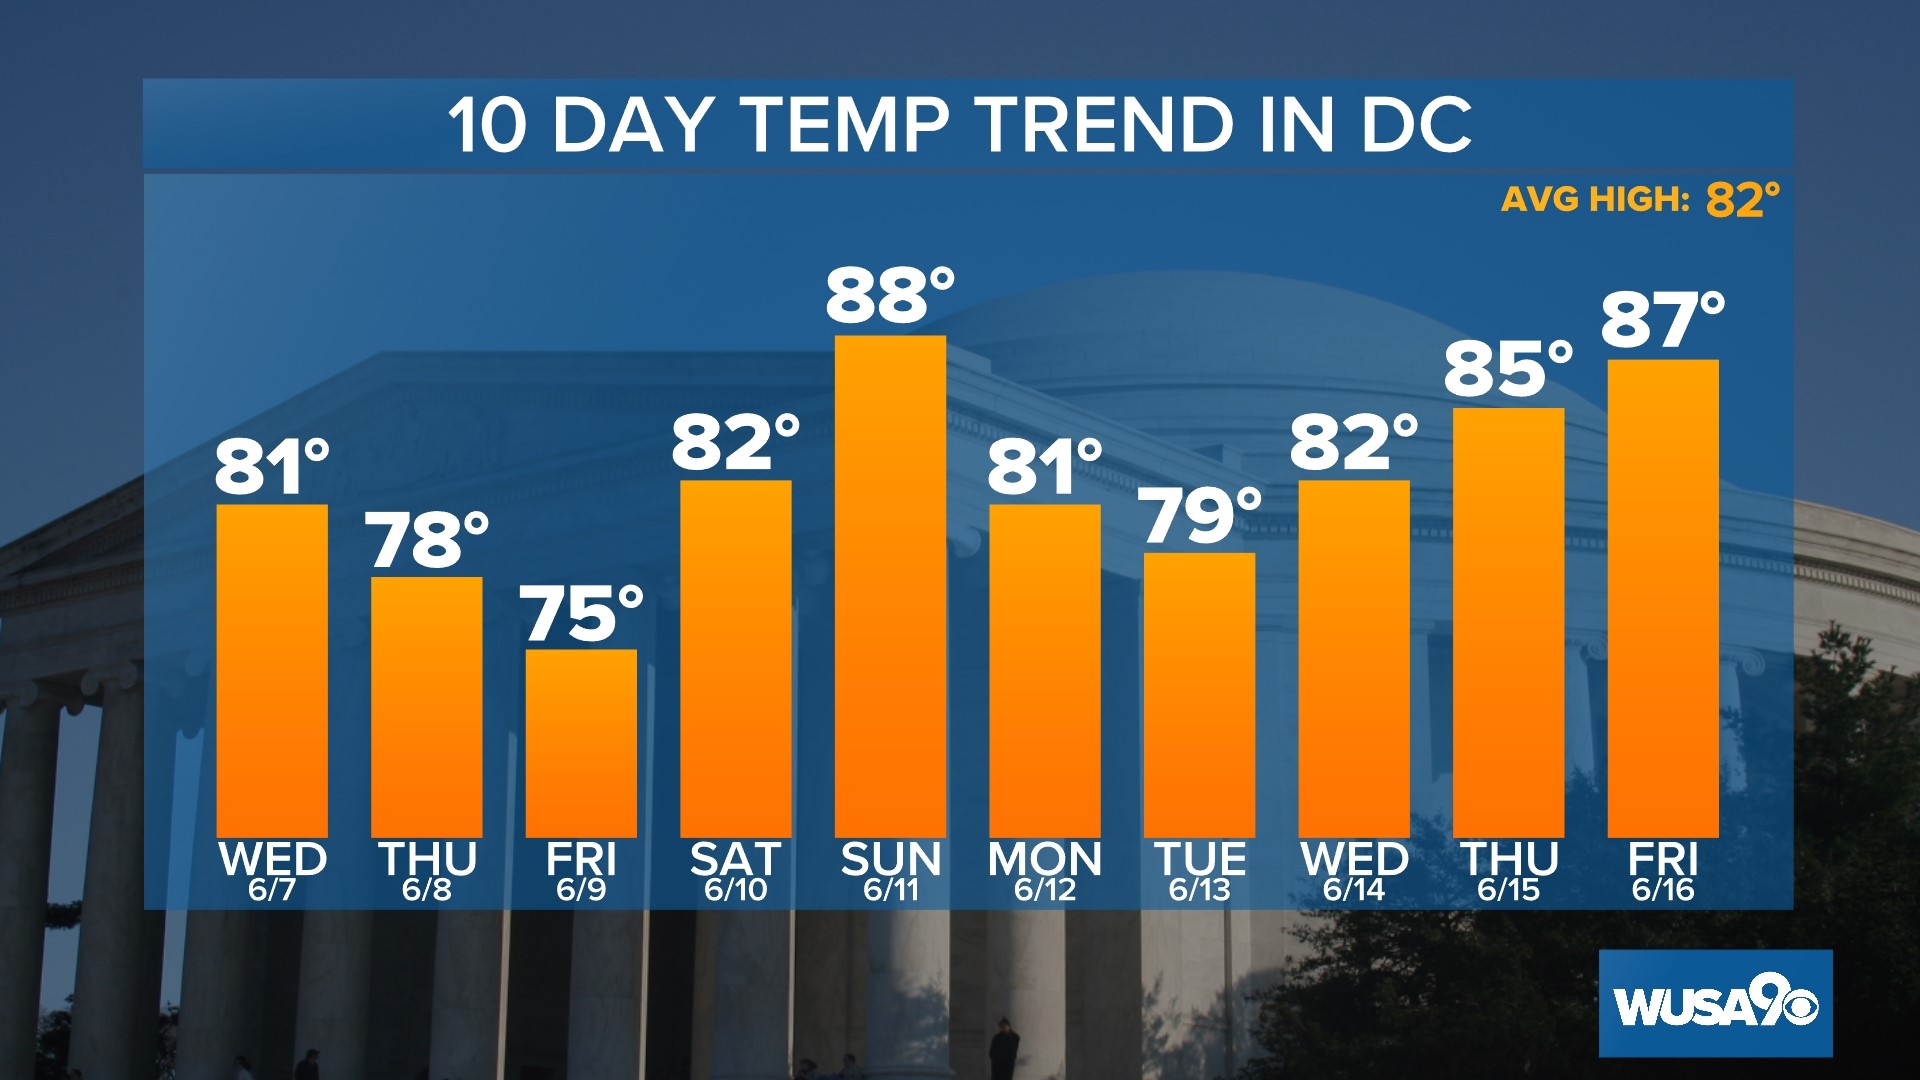 Wednesday will be partly cloudy and pleasant across the DMV.